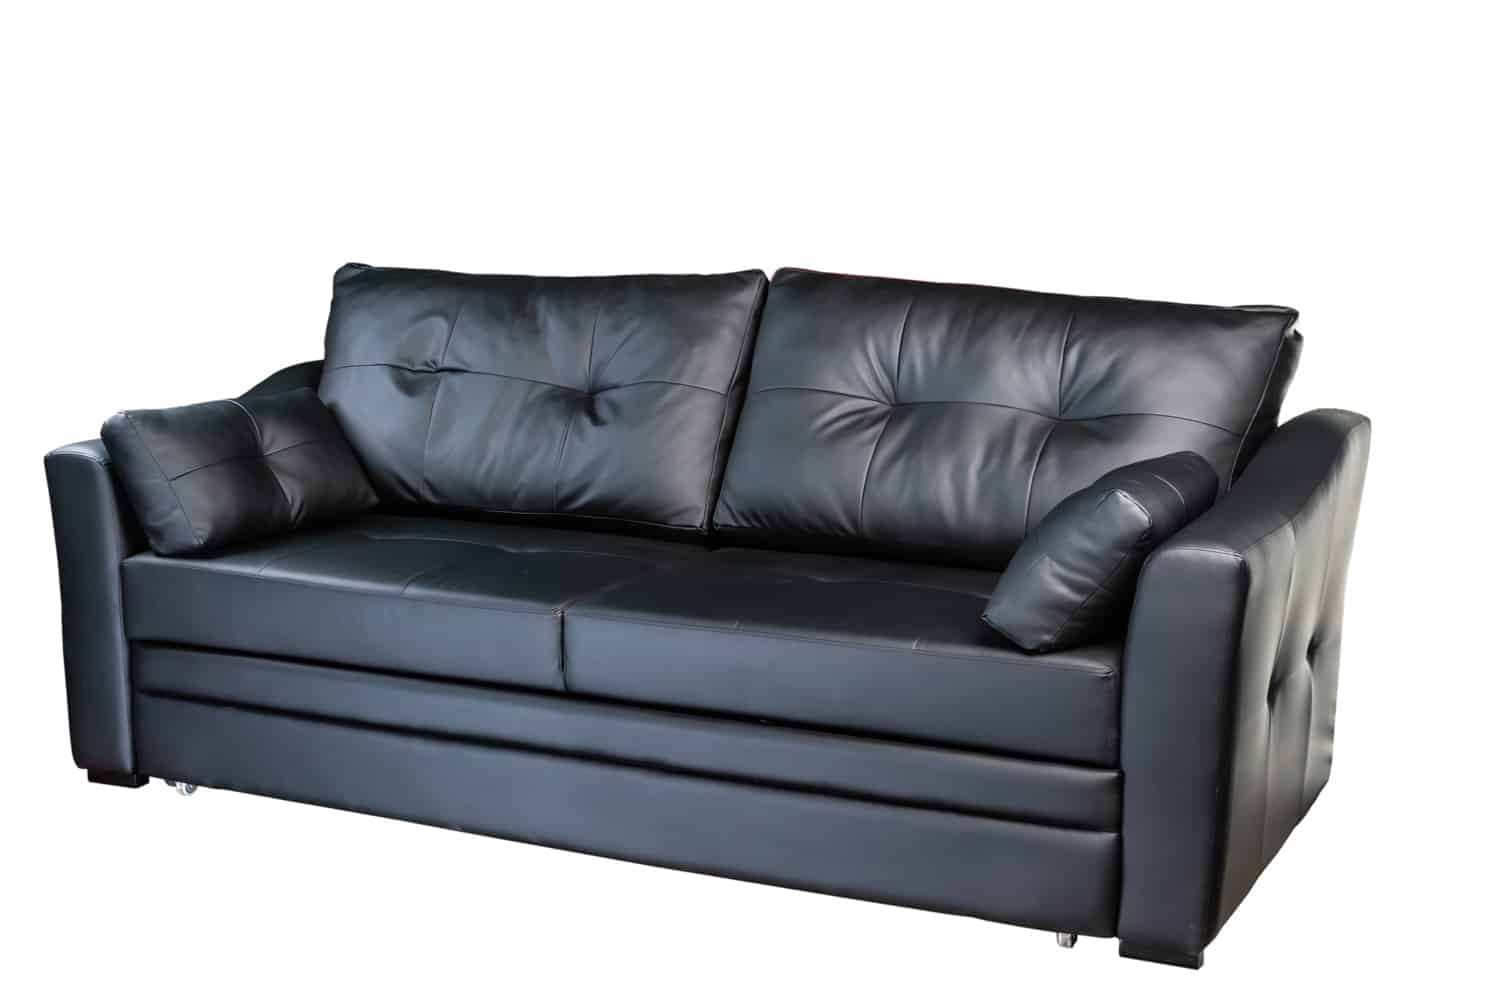 dark artificial leather sofa folded and laid out as a bed isolated on a white background